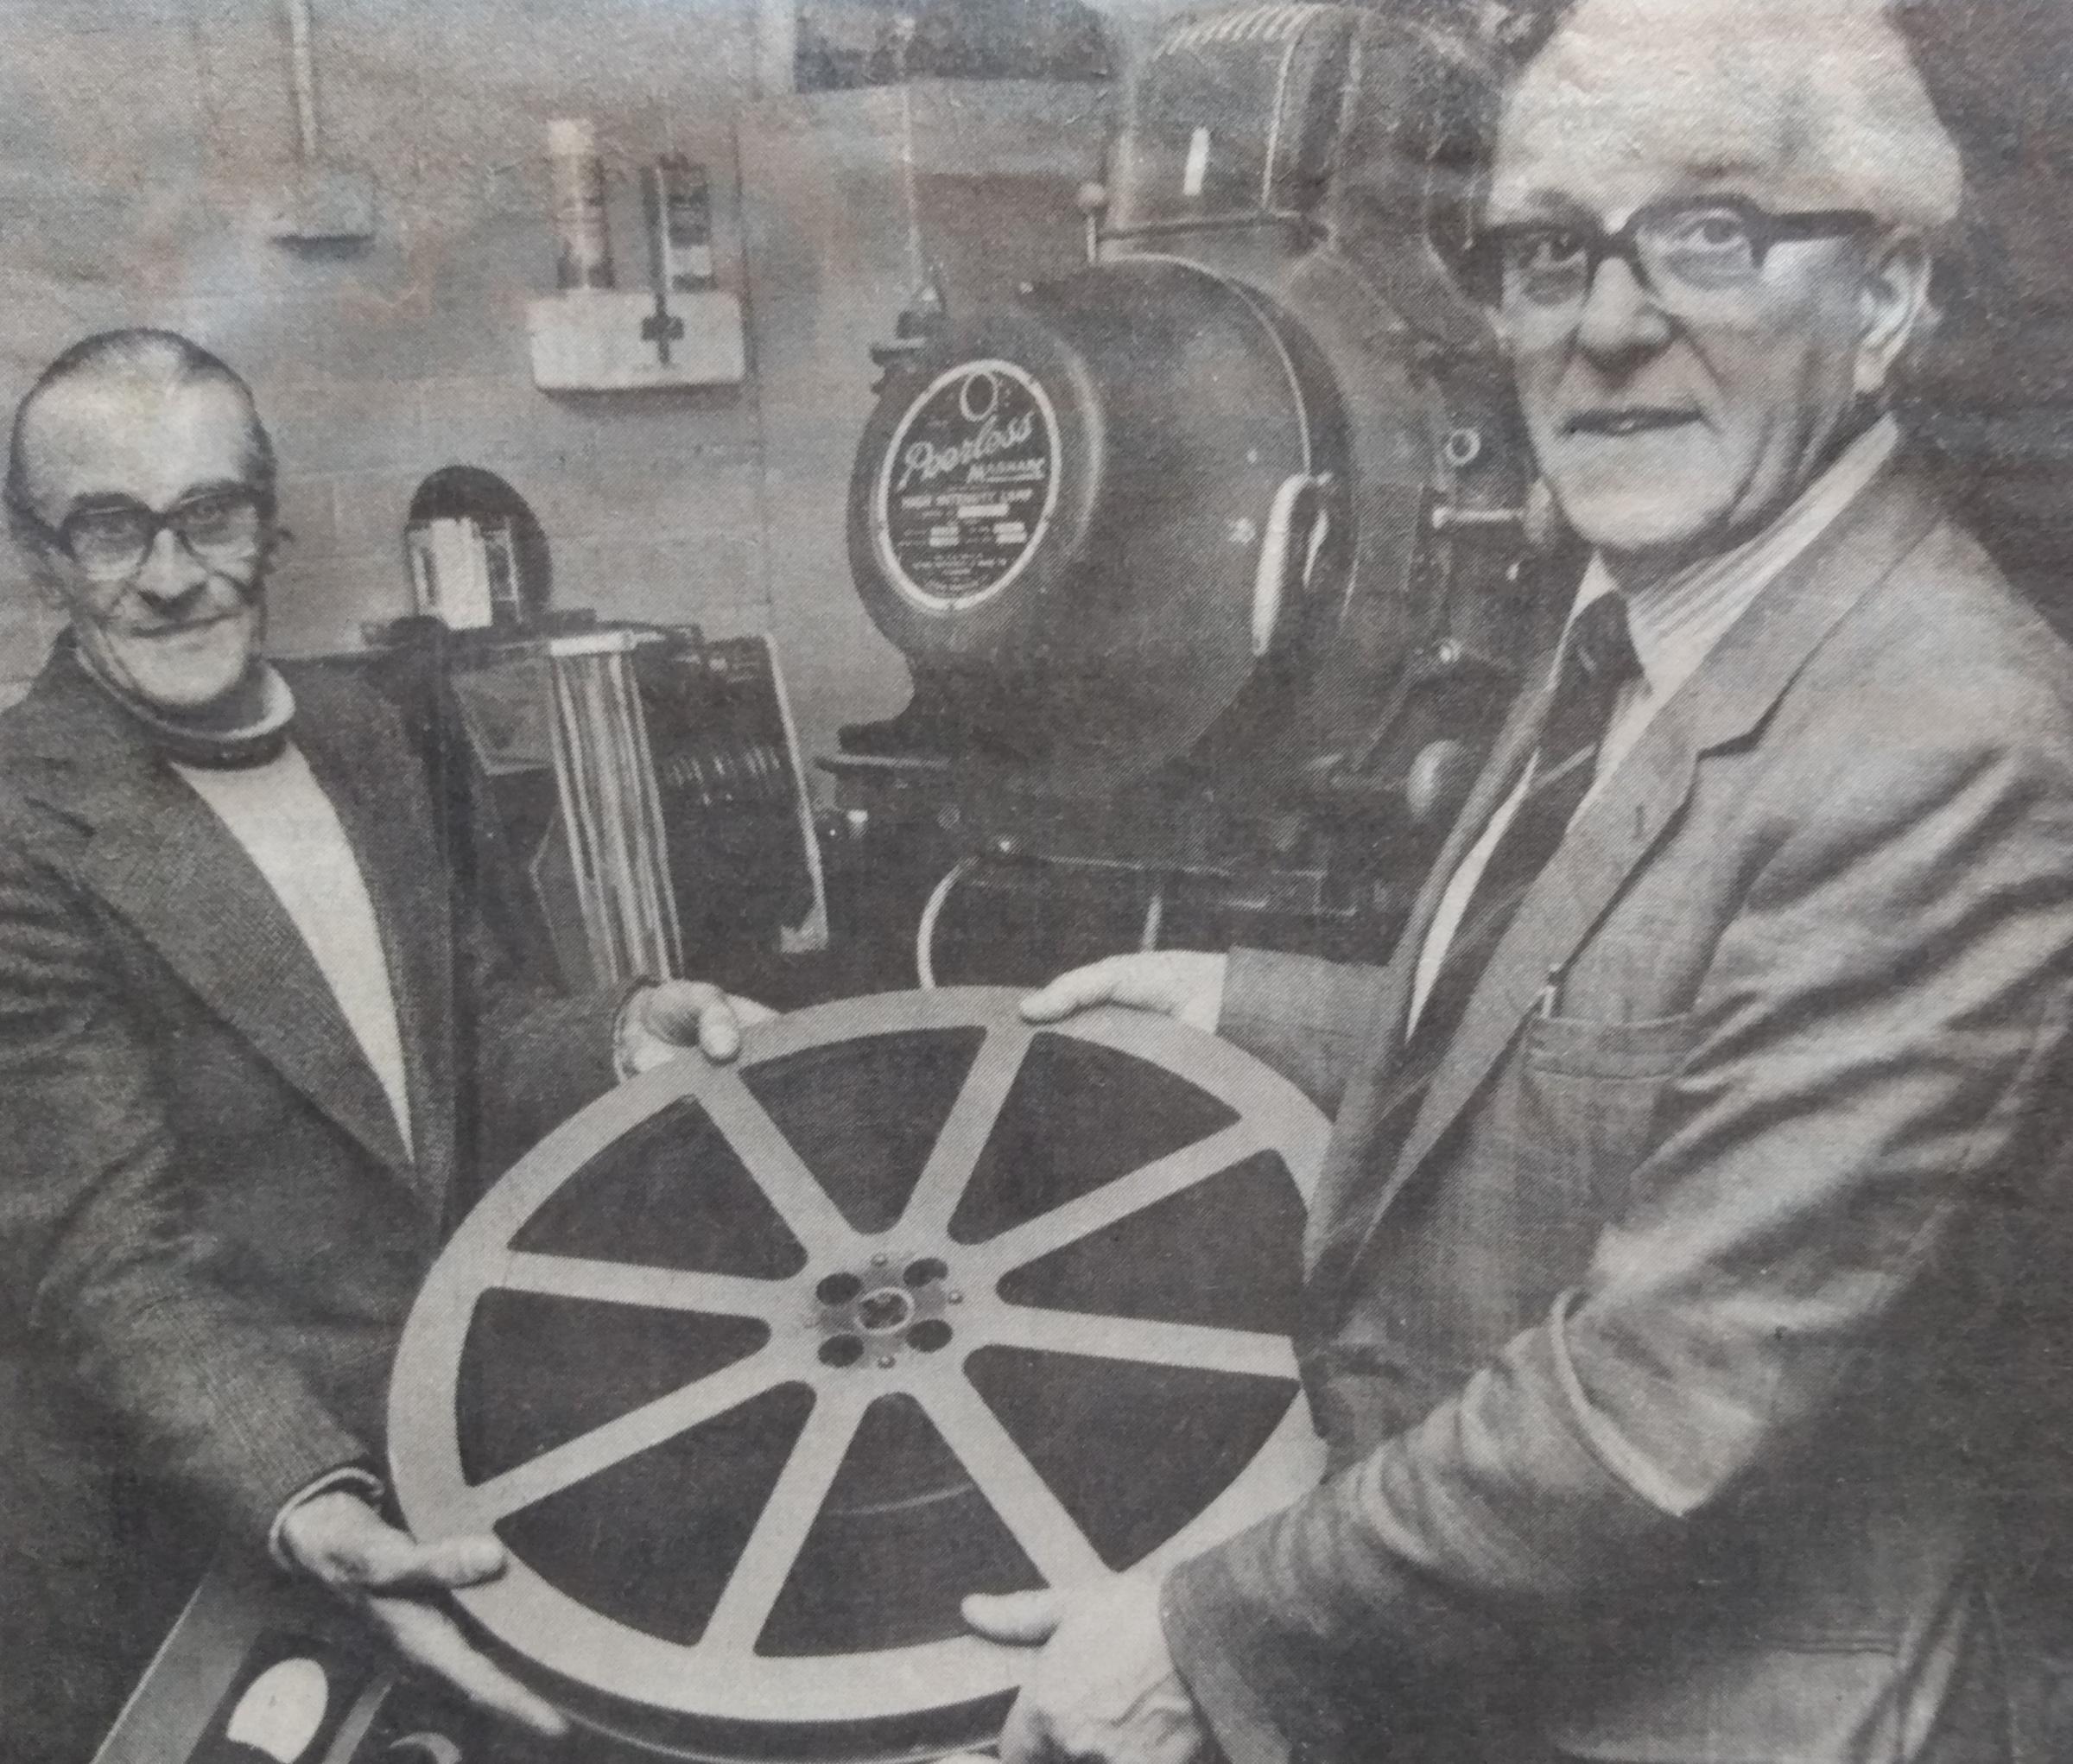 January 1983, and Regal cinema manager Ernie Highland, right, is pictured with projectionist Peter Bennett after it was announced that ET had broken box office records the previous year